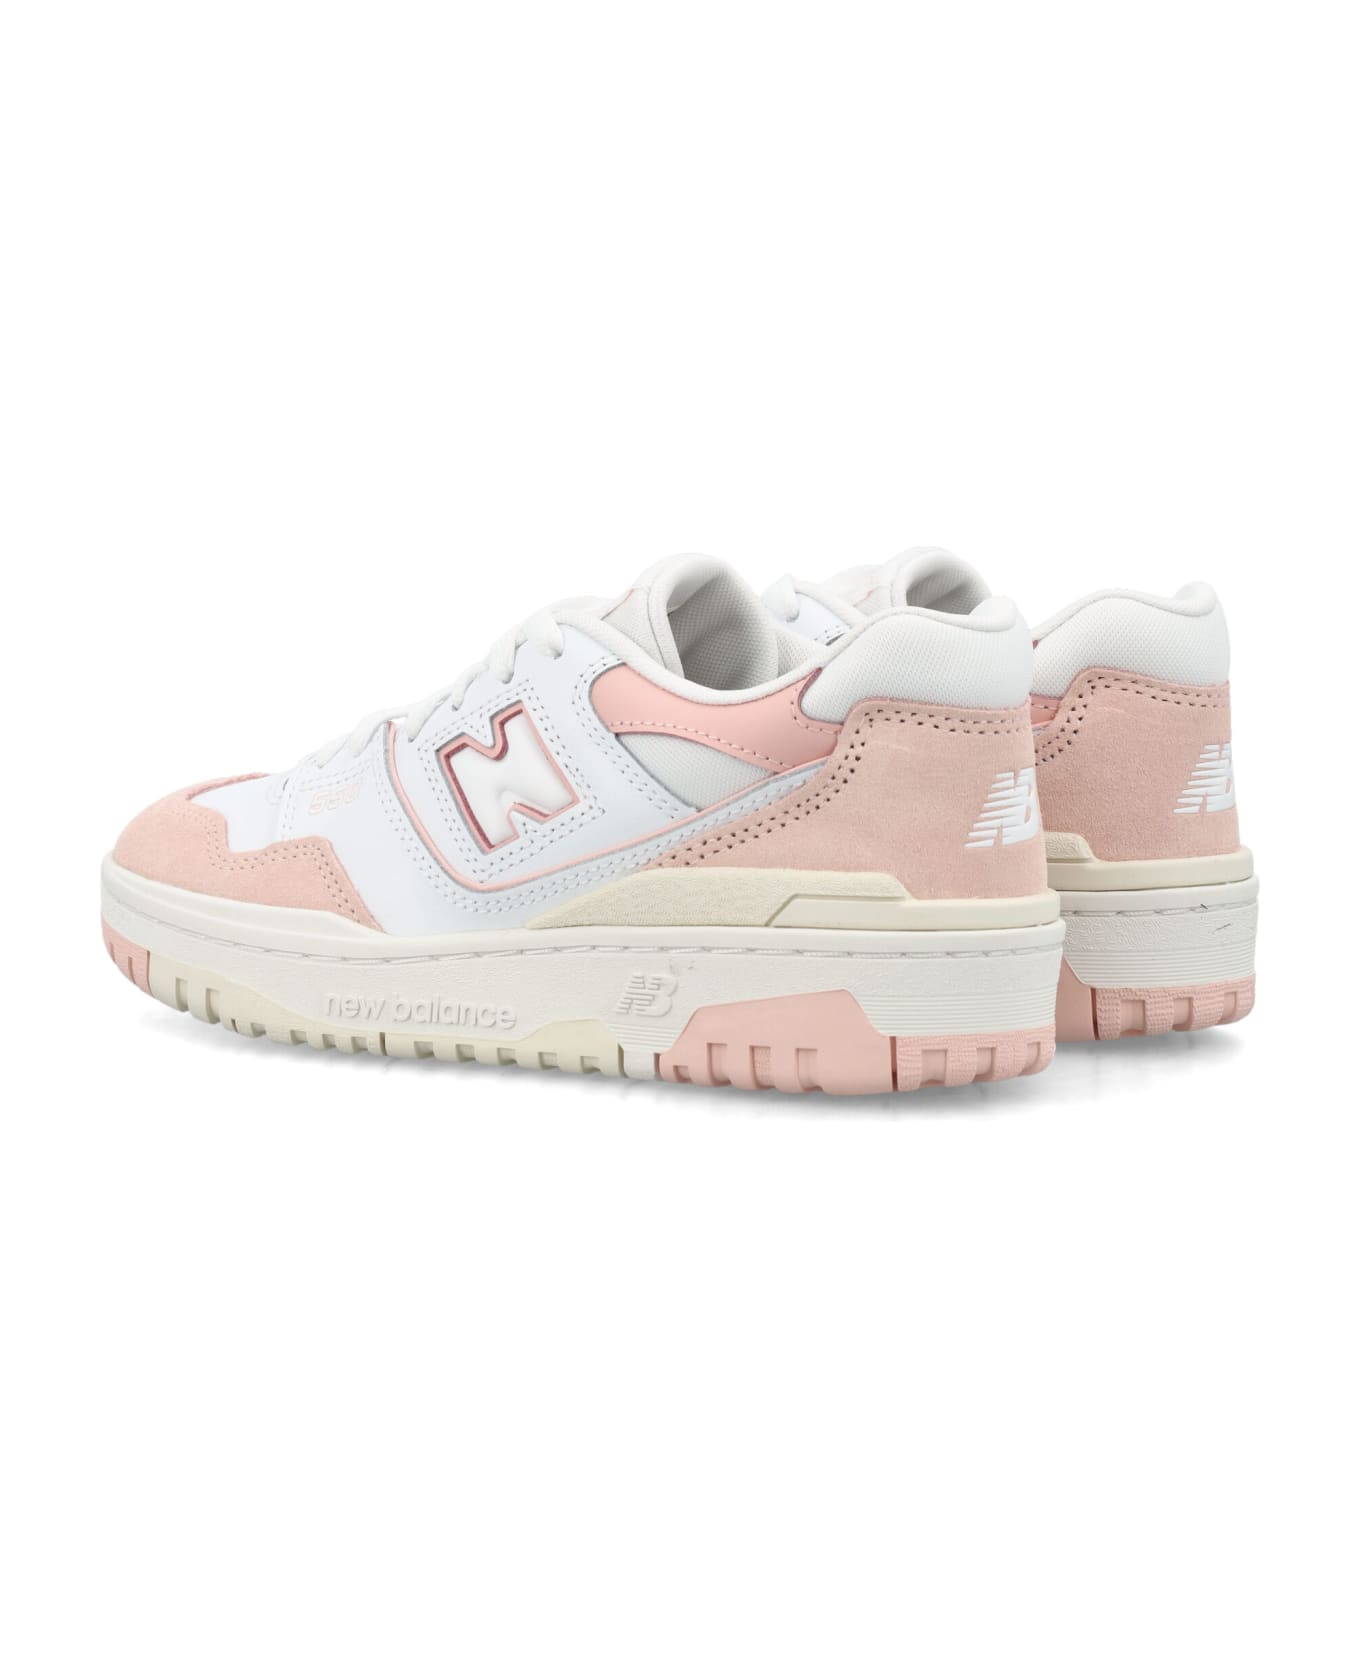 New Balance 550 Sneakers - ROSE/WHITE